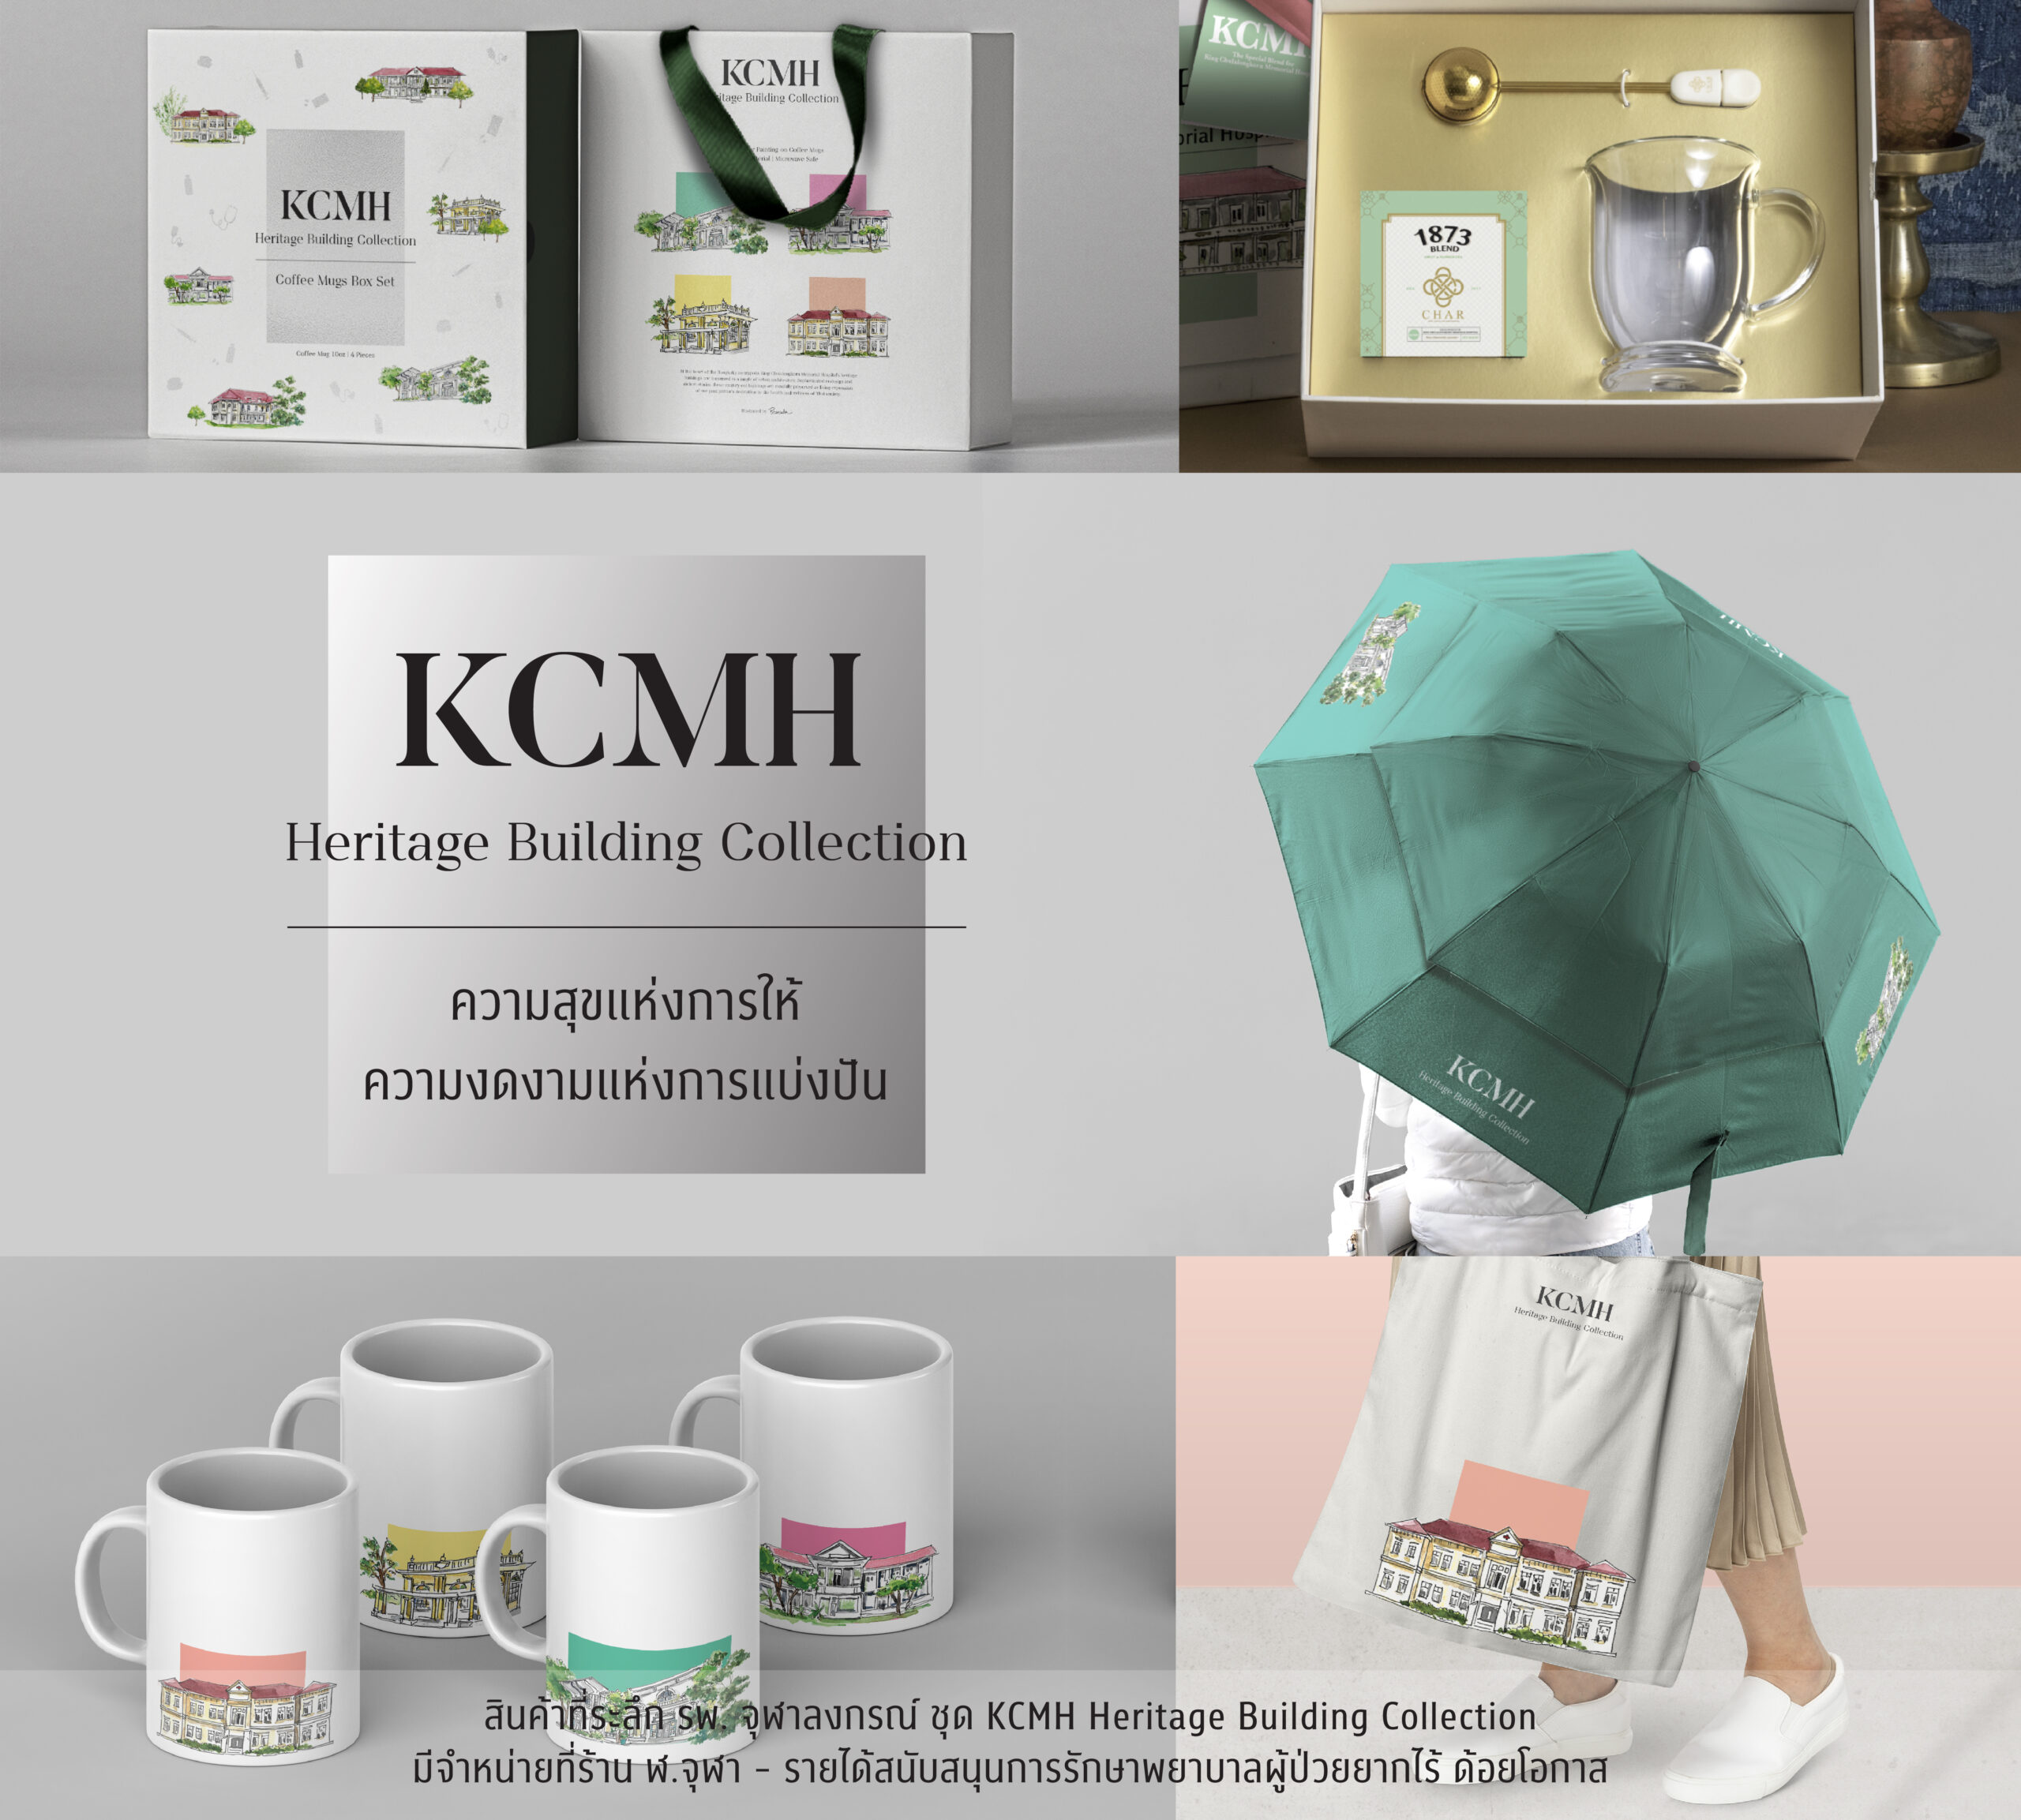 KCMH Heritage Building Collection